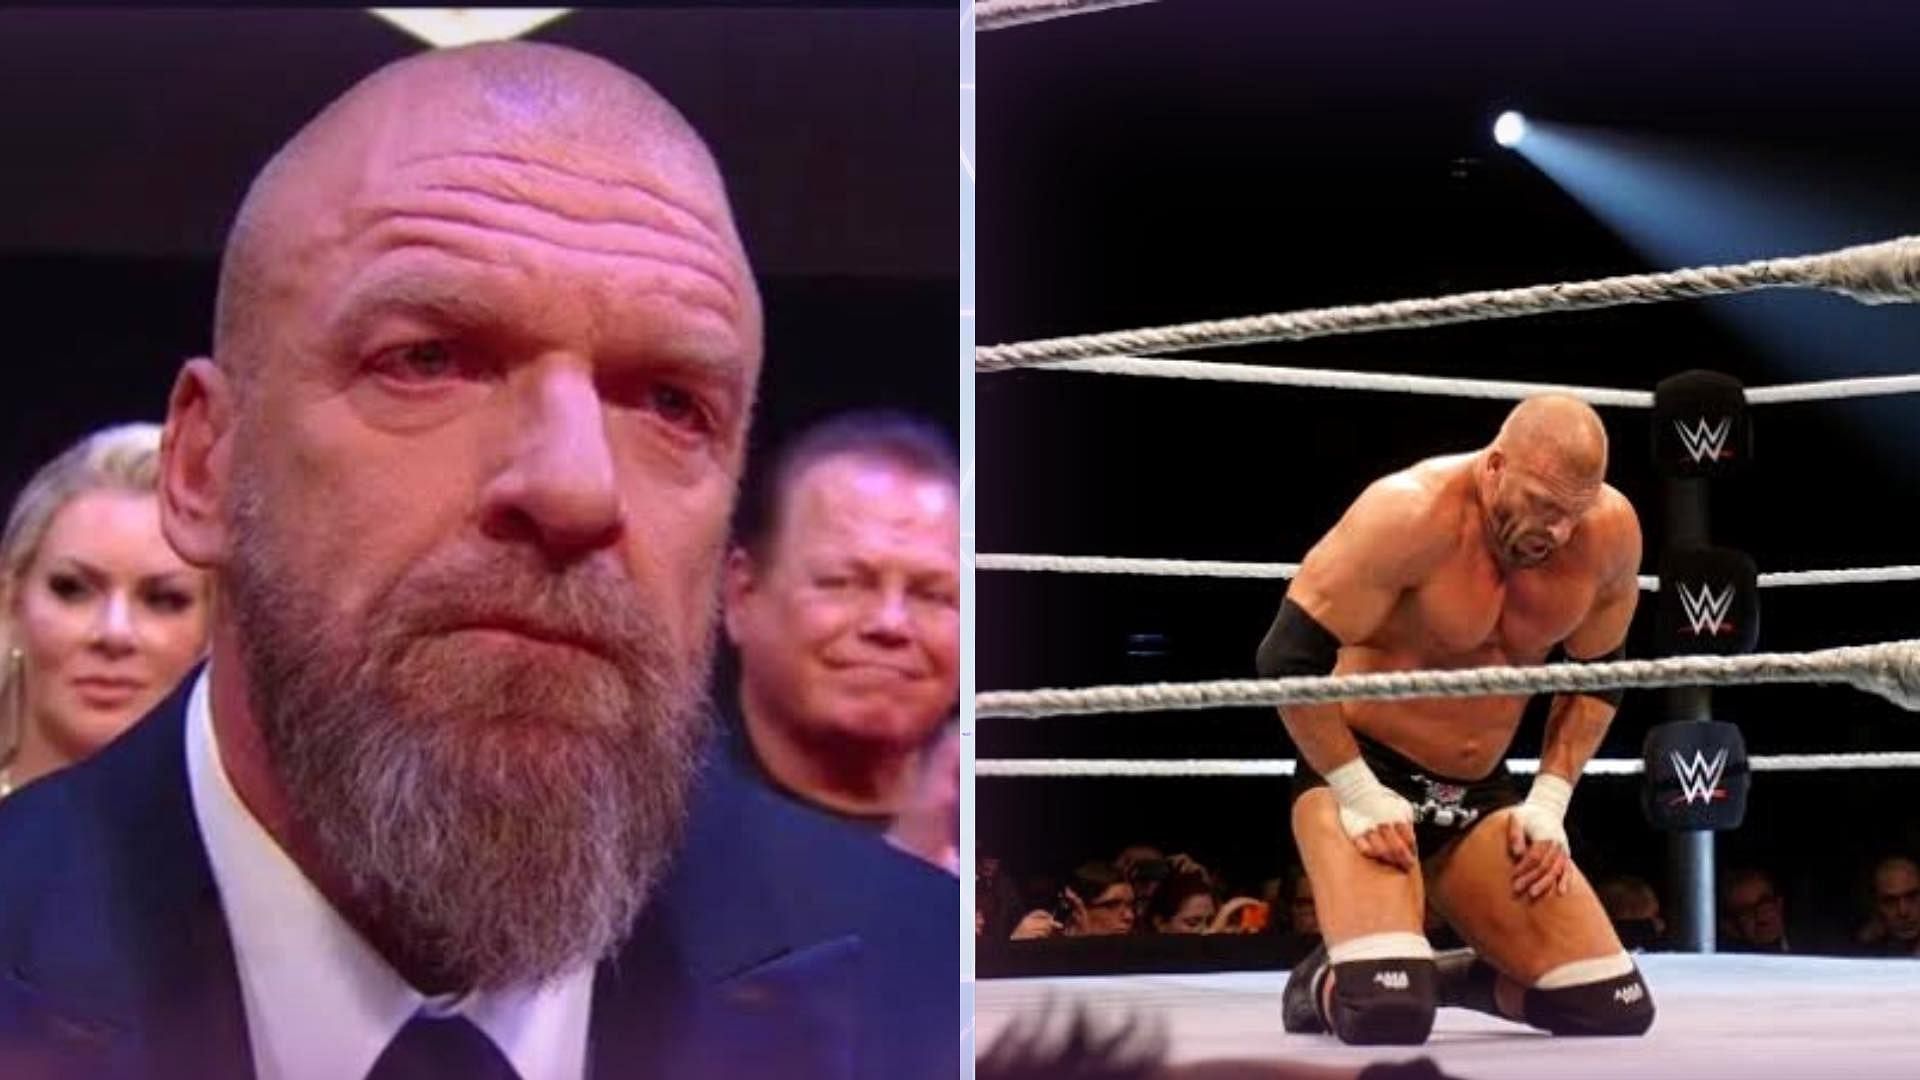 Triple H was not happy about the situation